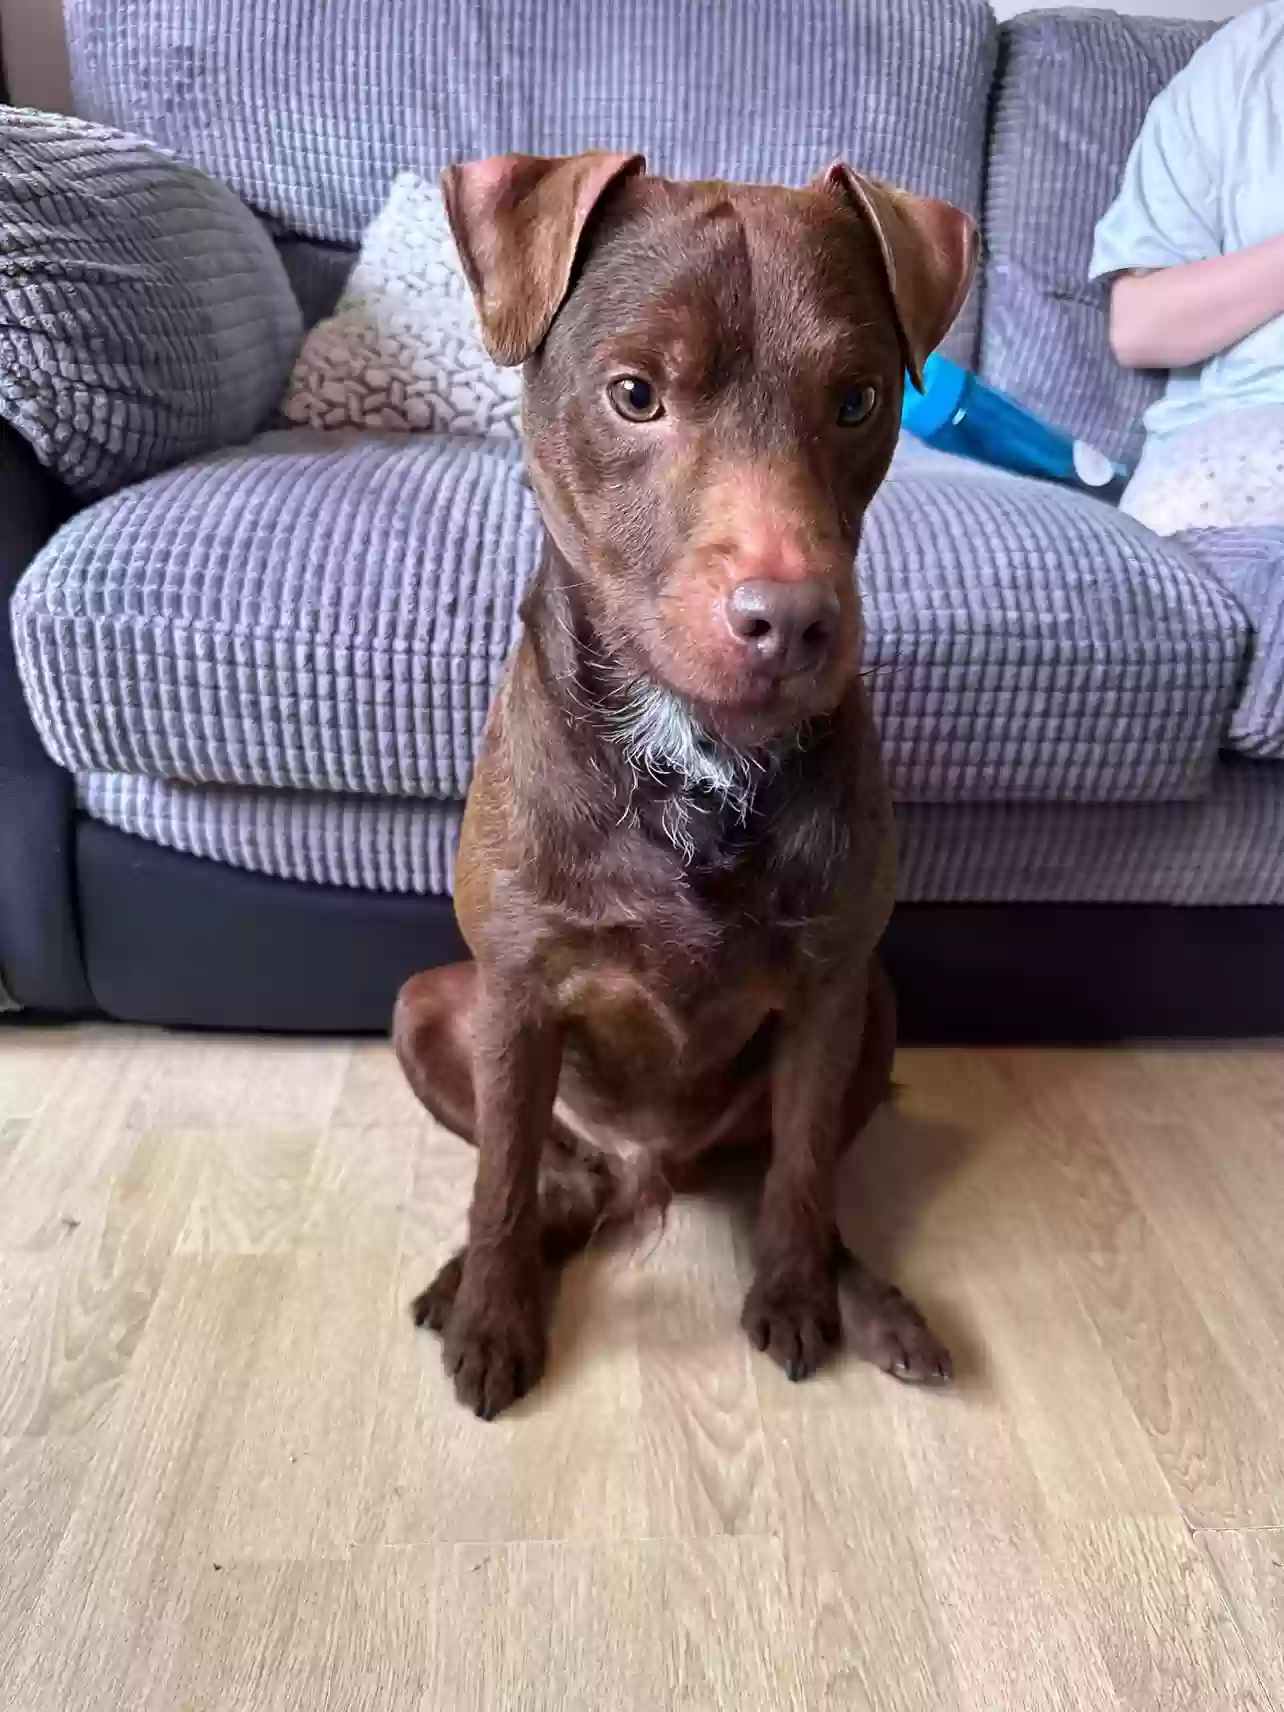 adoptable Dog in Cardiff,Wales named Toby